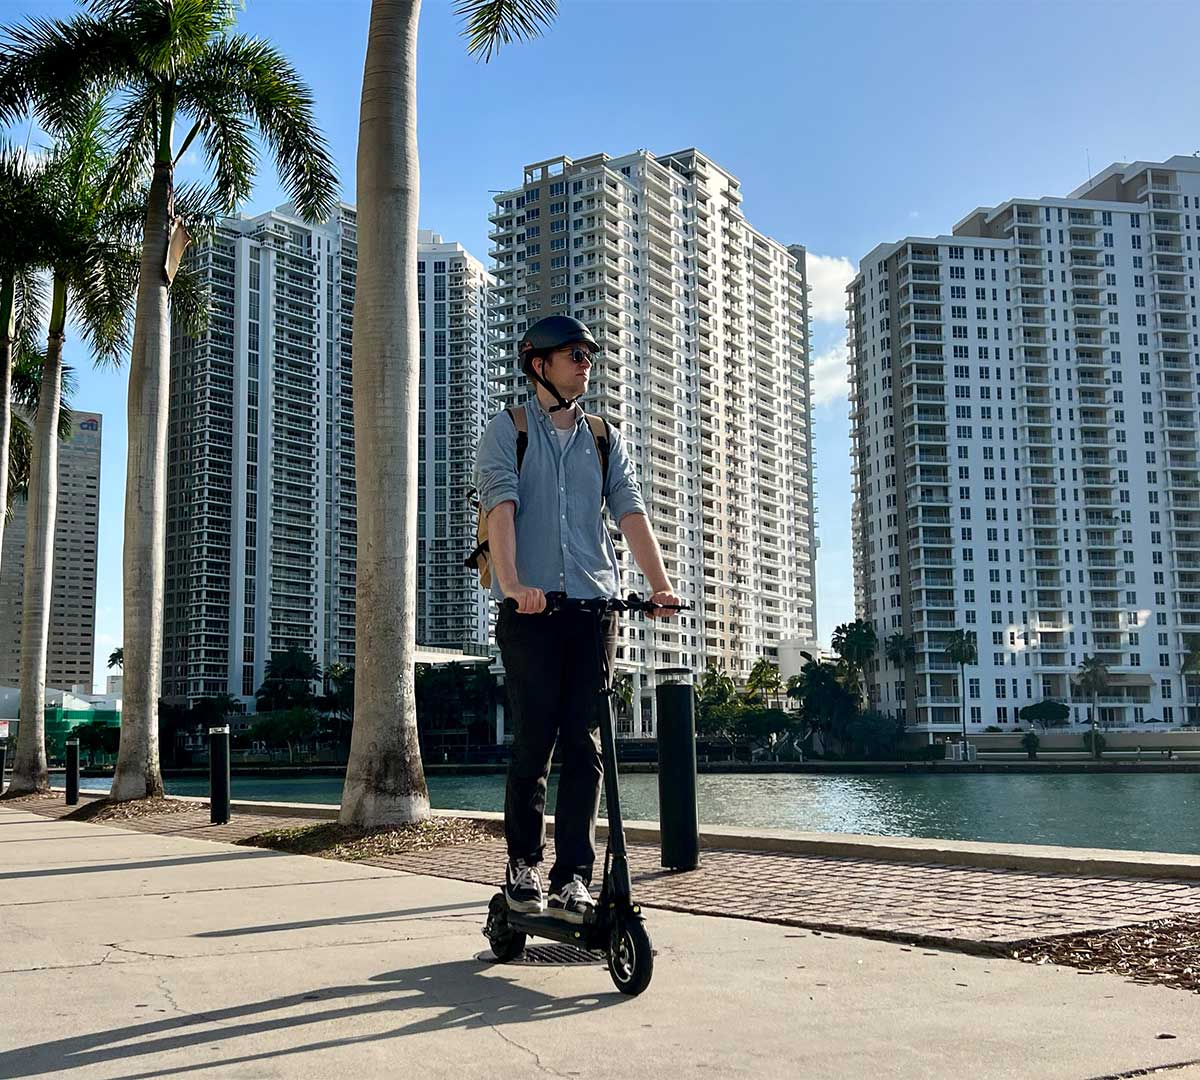 Man on an electric scooter by the waterfront with cityscape in the background.